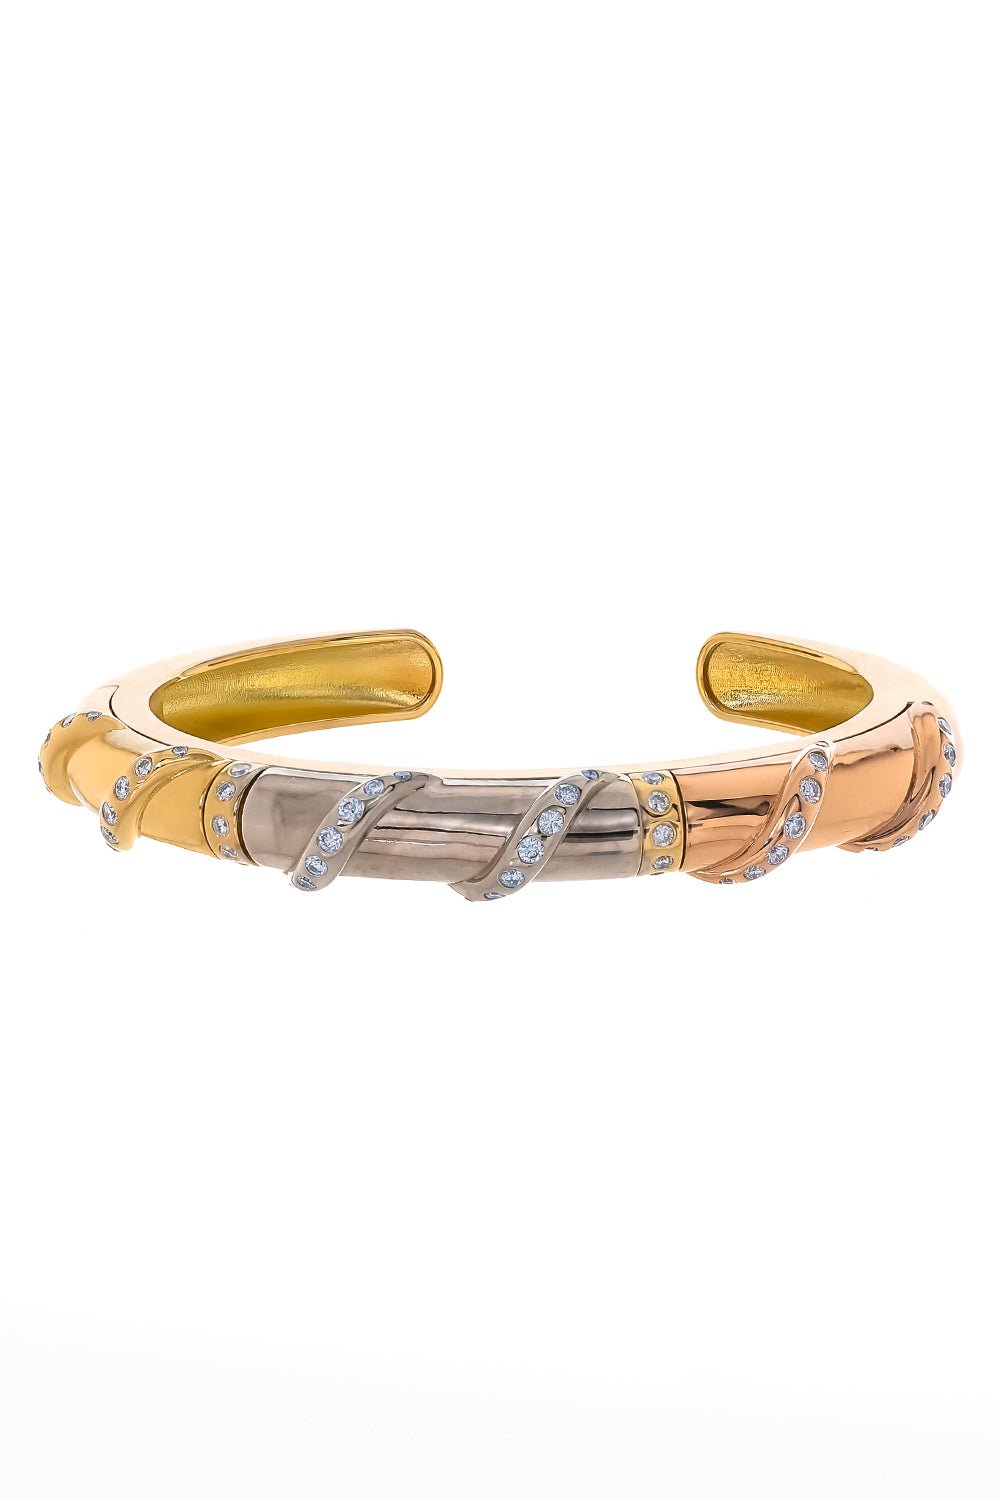 BRENT NEALE-Mixed-Metal Friendship Cuff-YELLOW GOLD